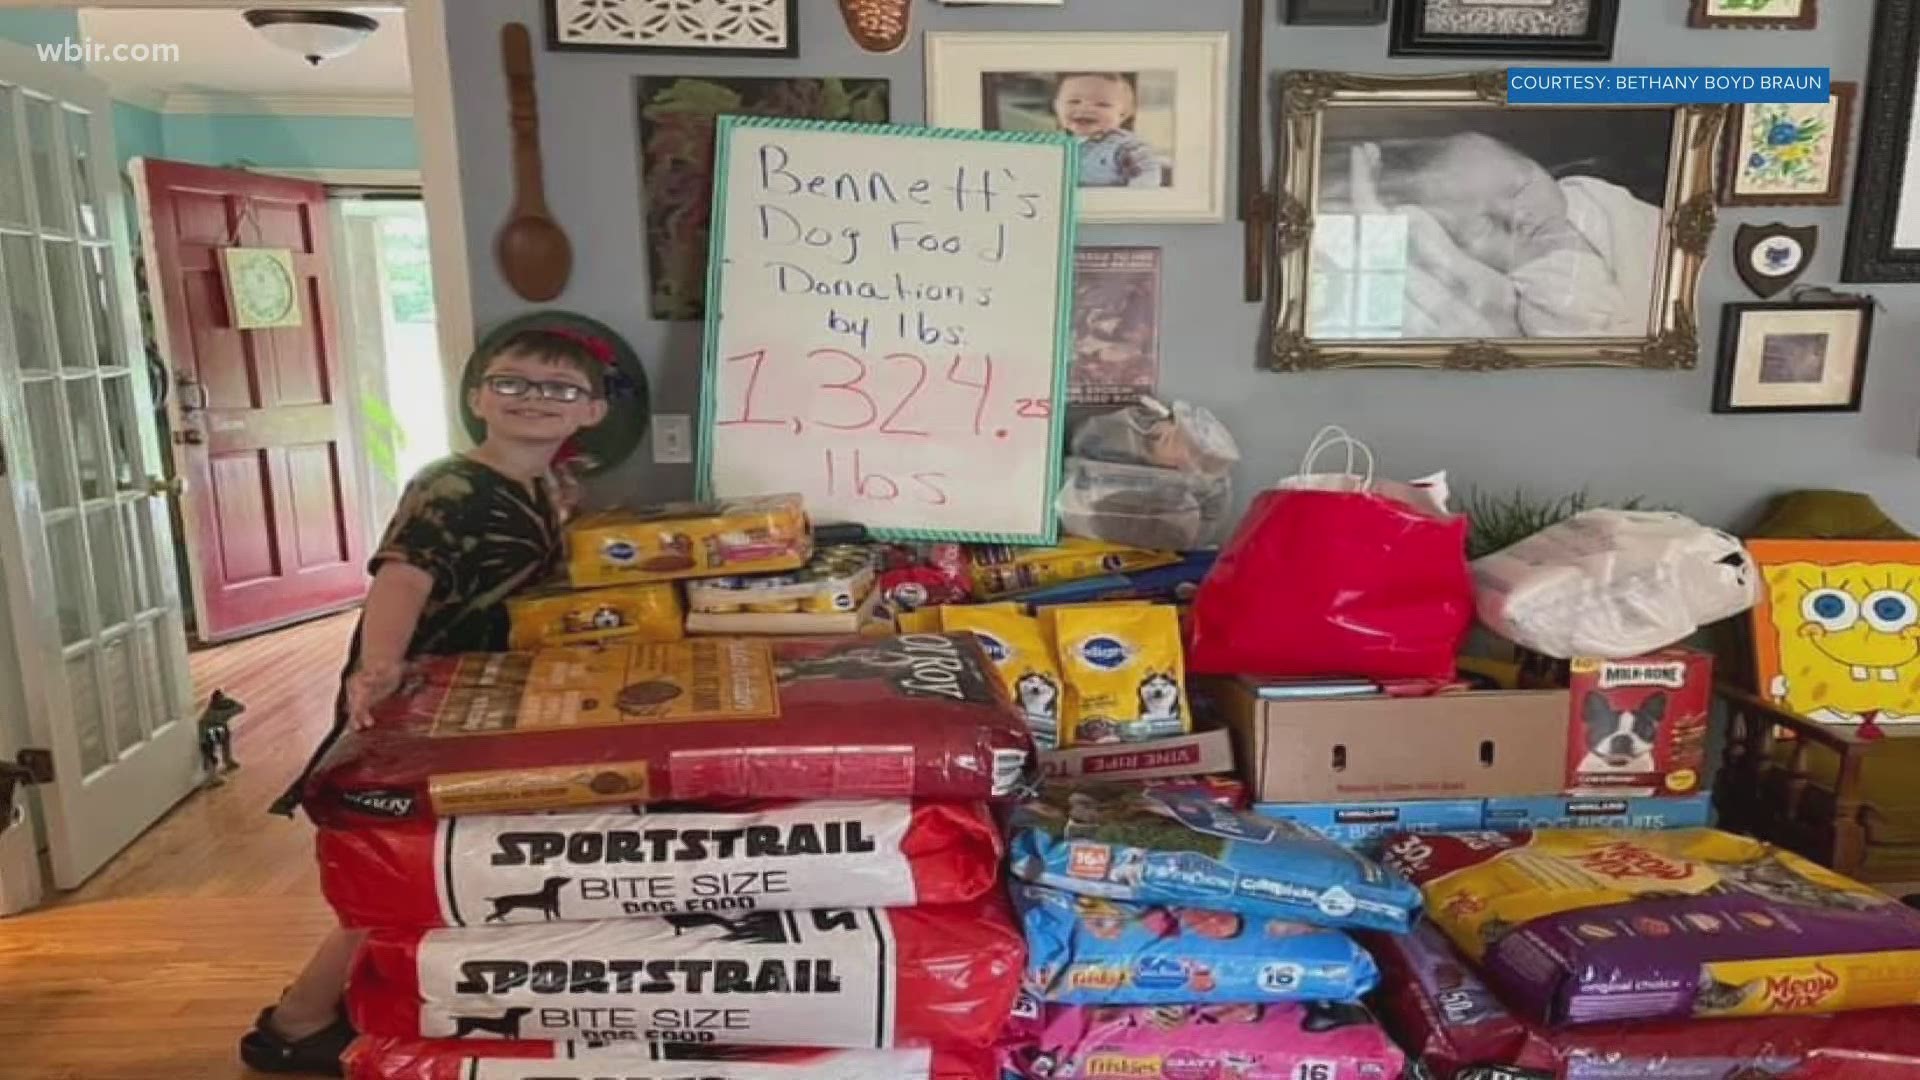 9-year-old Bennett Braun is asking for pet food donations for this 10th birthday.